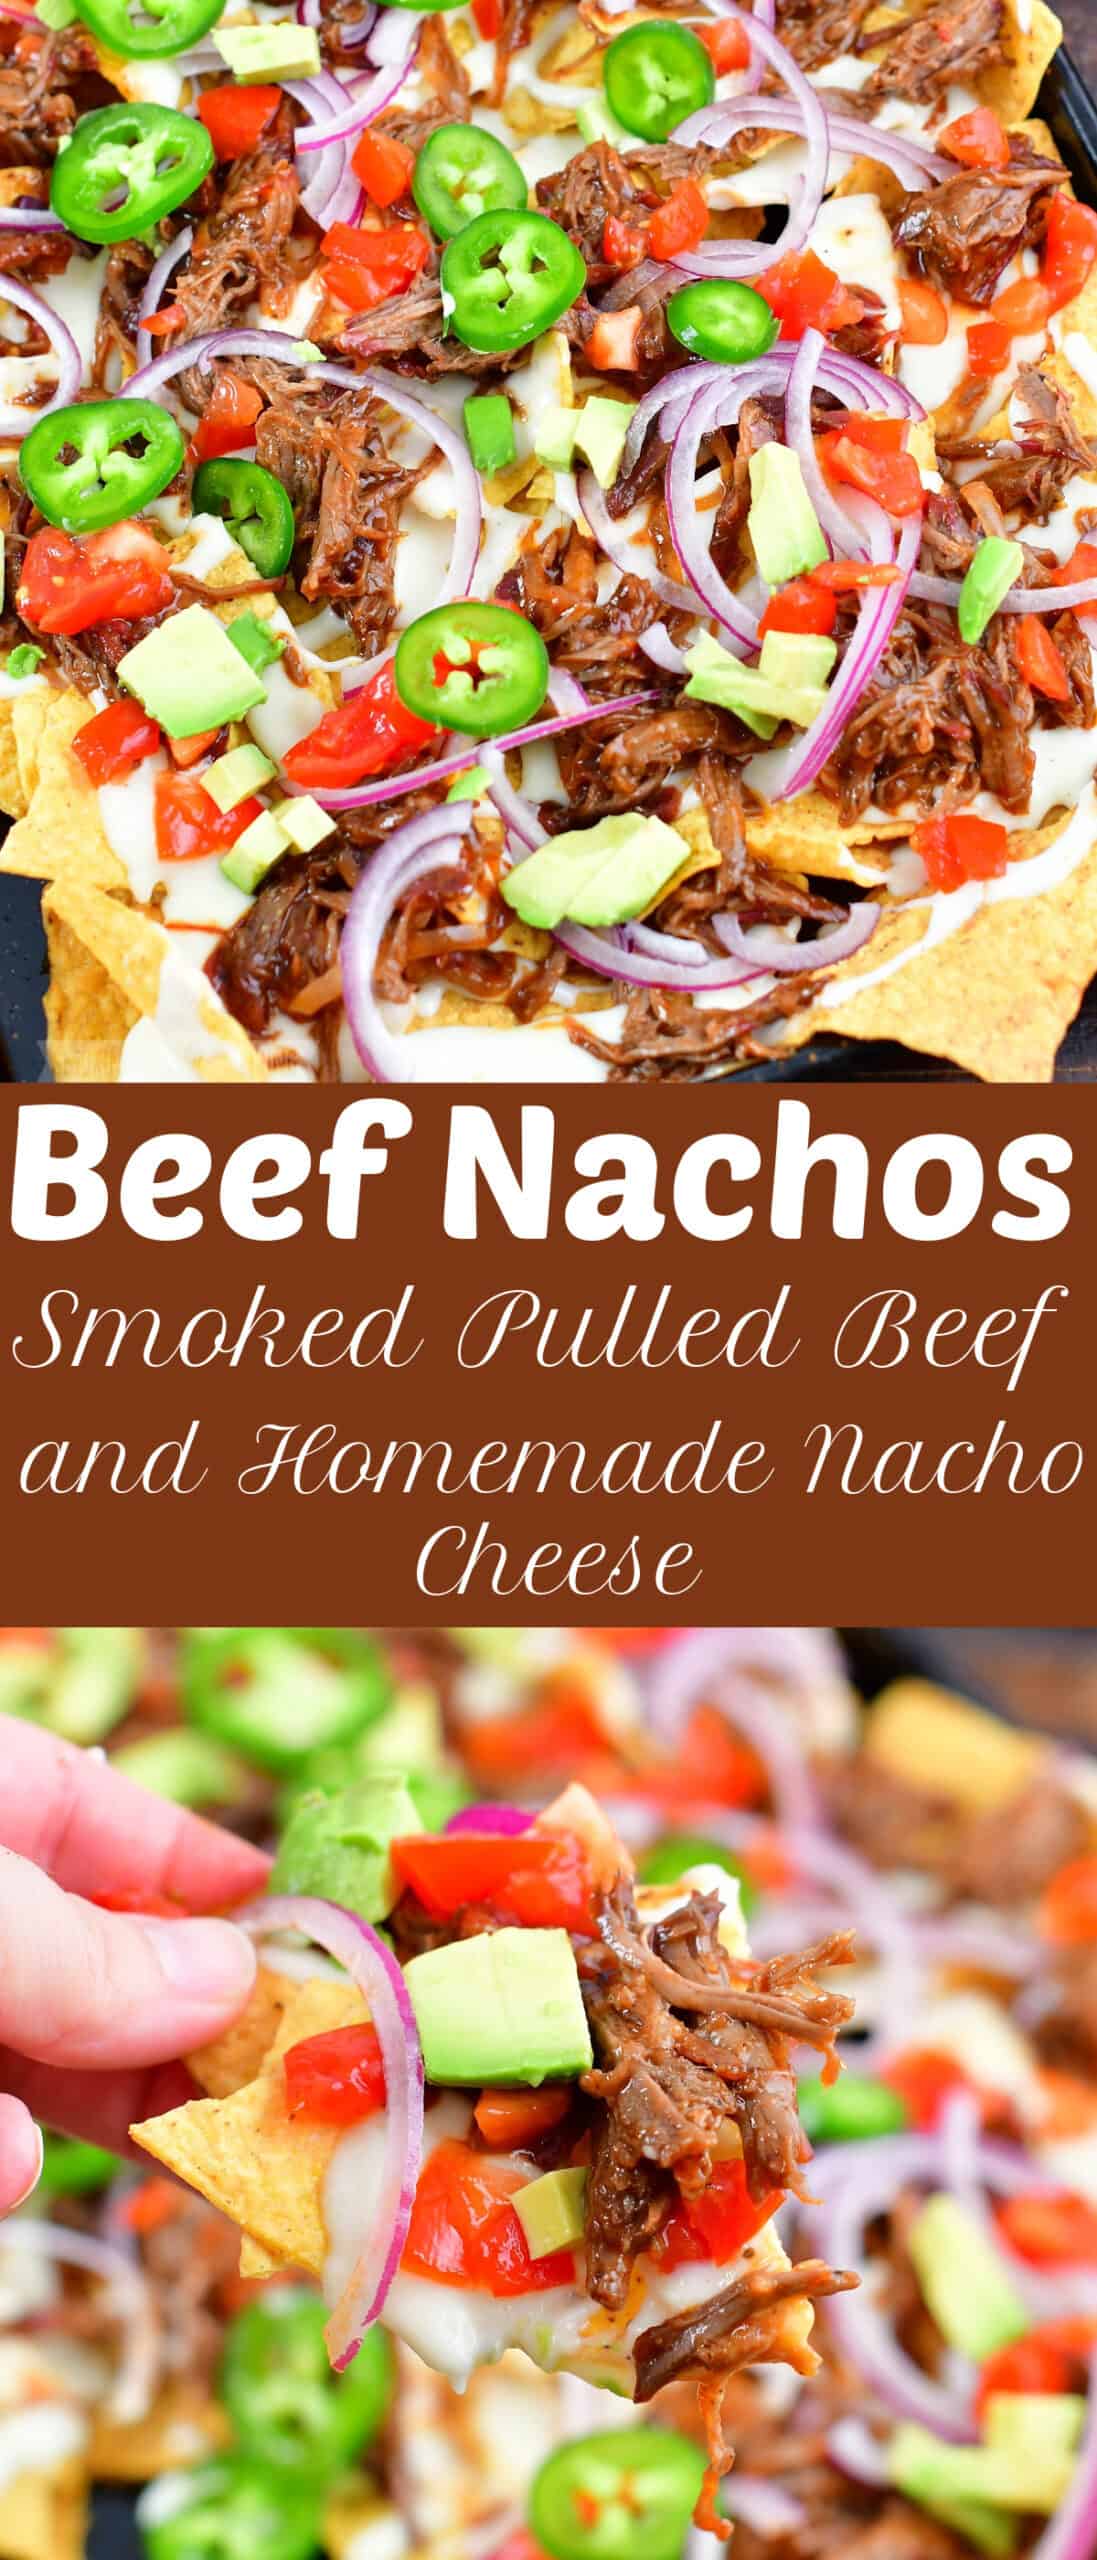 collage of two images of closeup beef nachos and title